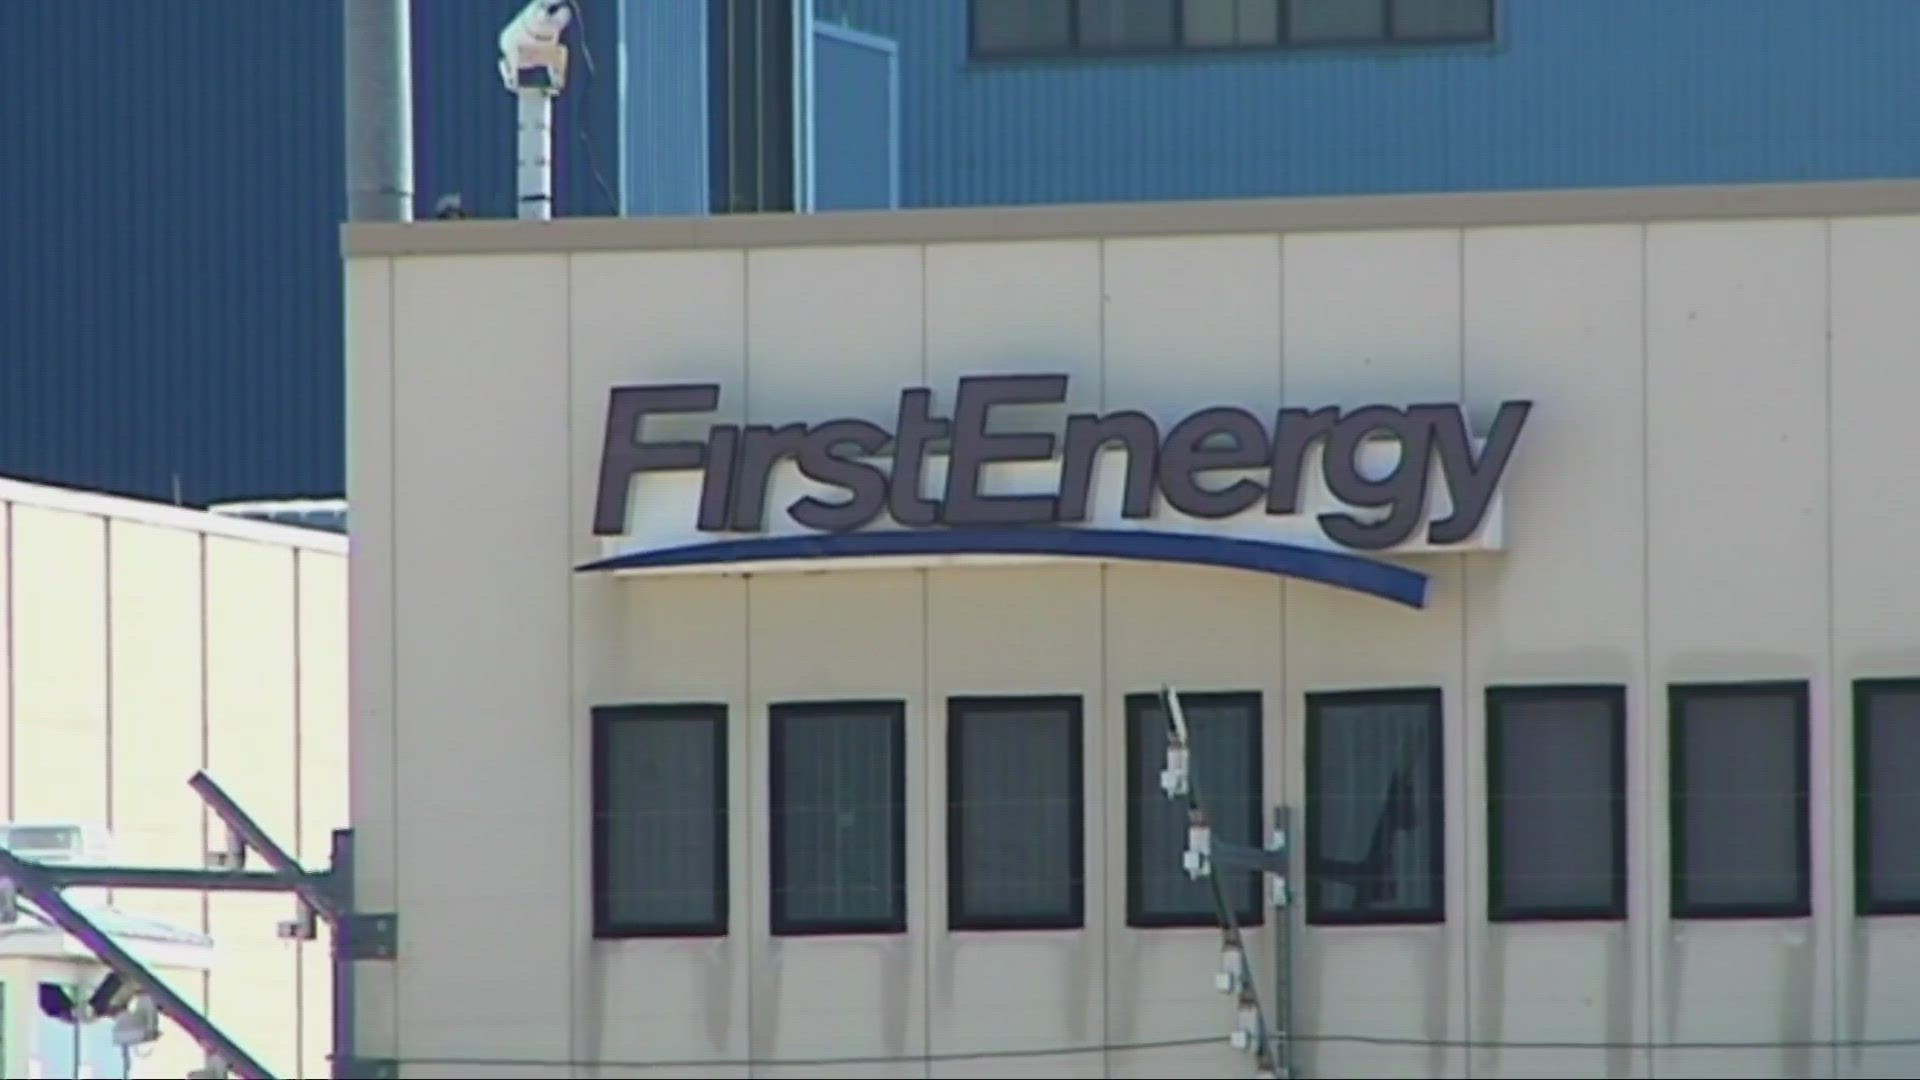 Starting June 1, FirstEnergy is increasing its rates to over 10 cents per kilowatt-hour, but not everyone will be affected.